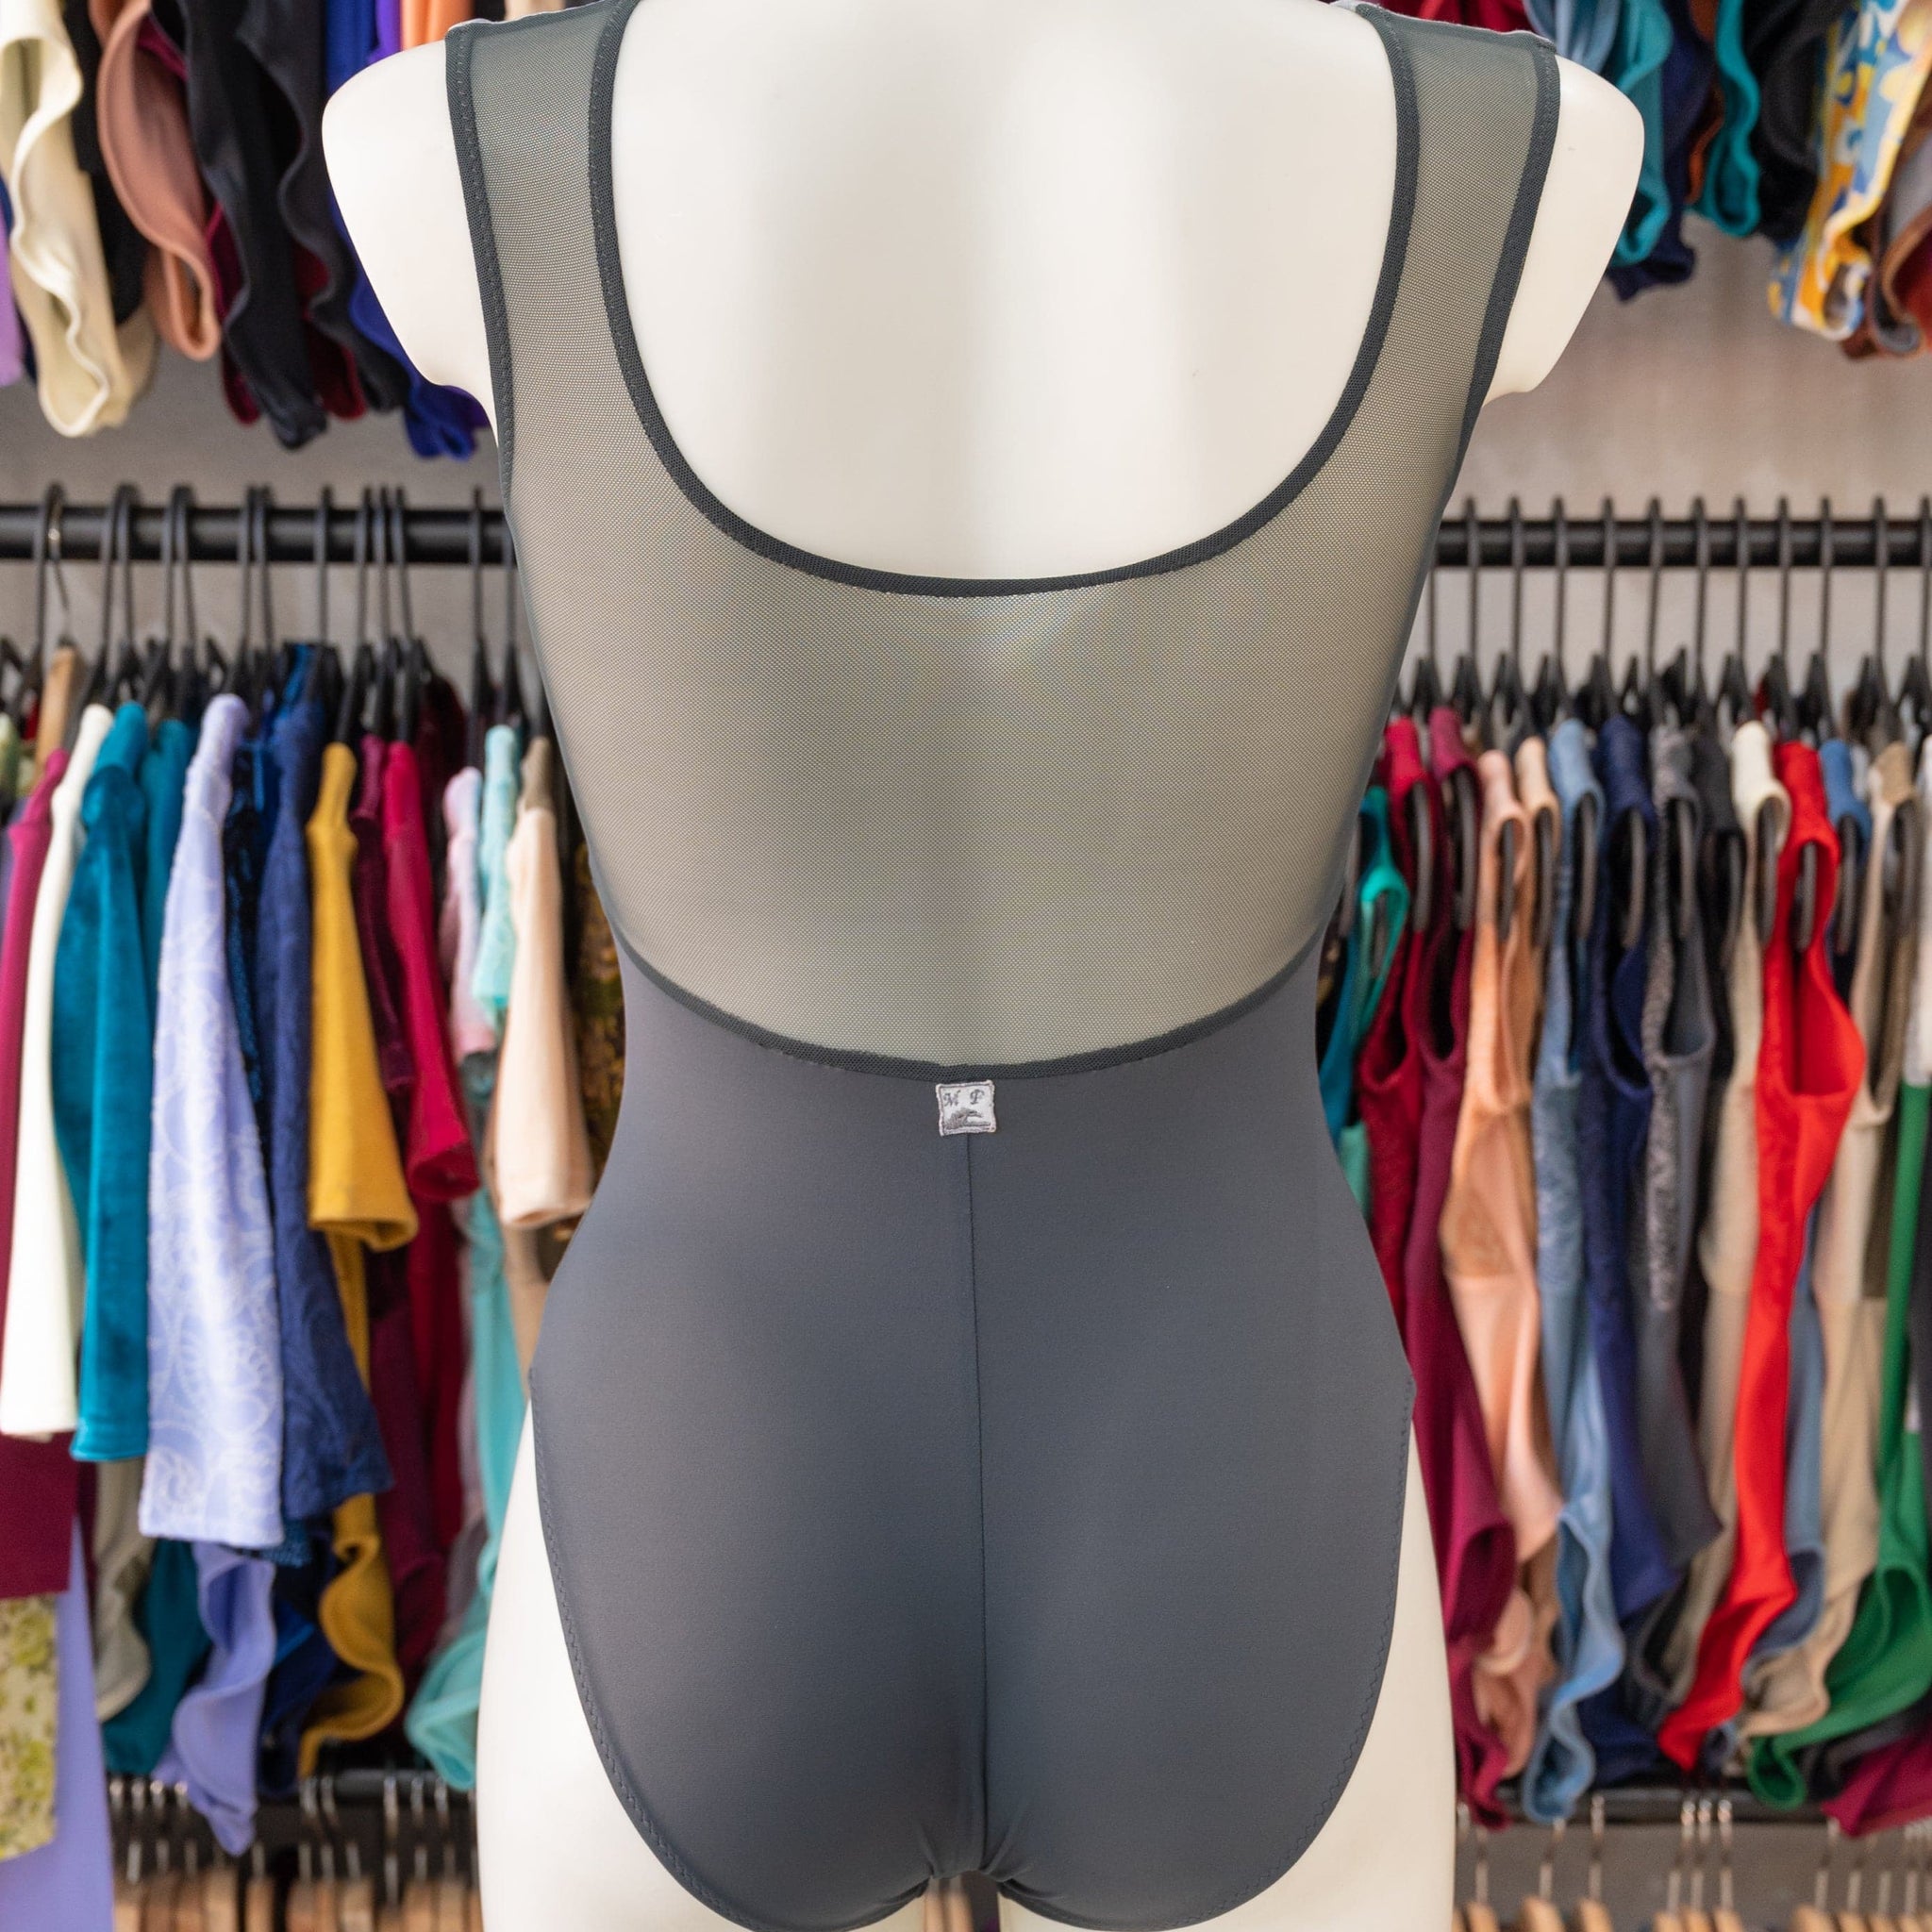 Gray Dance Leotard for Women with Velvet and Mesh by Atelier della Danza MP